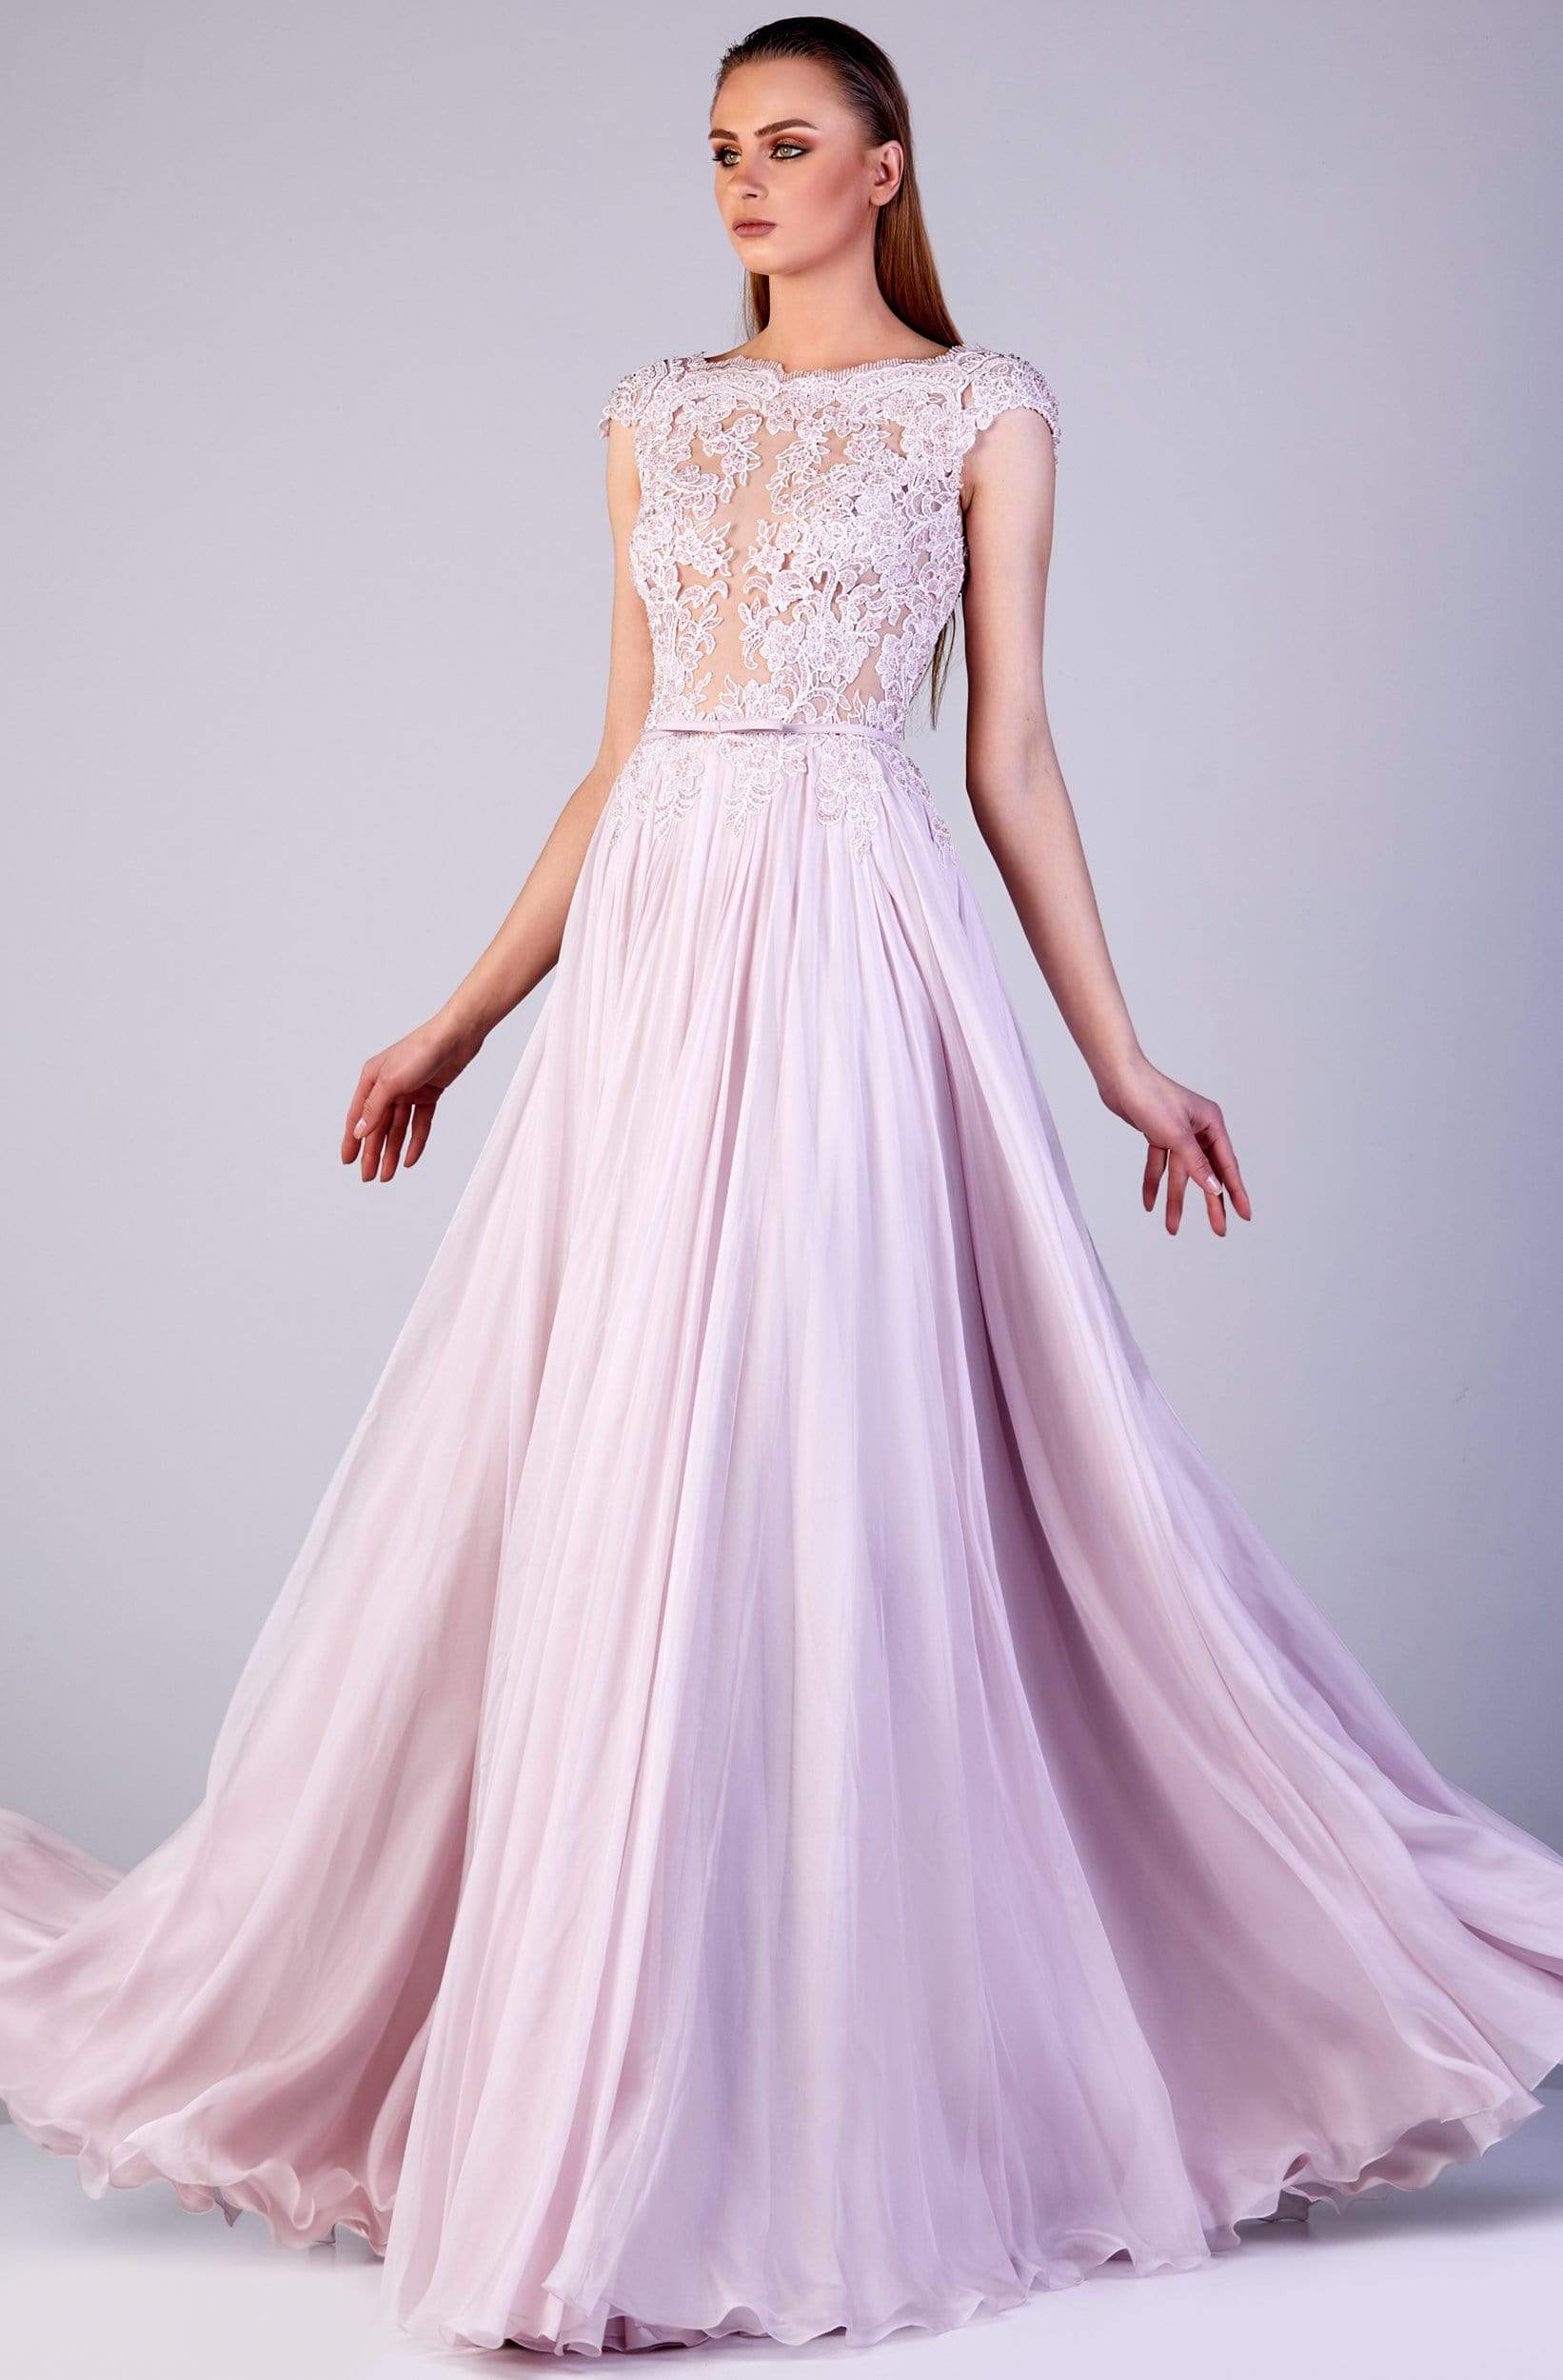 Image of Gatti Nolli Couture - OP-5153 Cap Sleeve Scalloped Trimmed Lace Gown